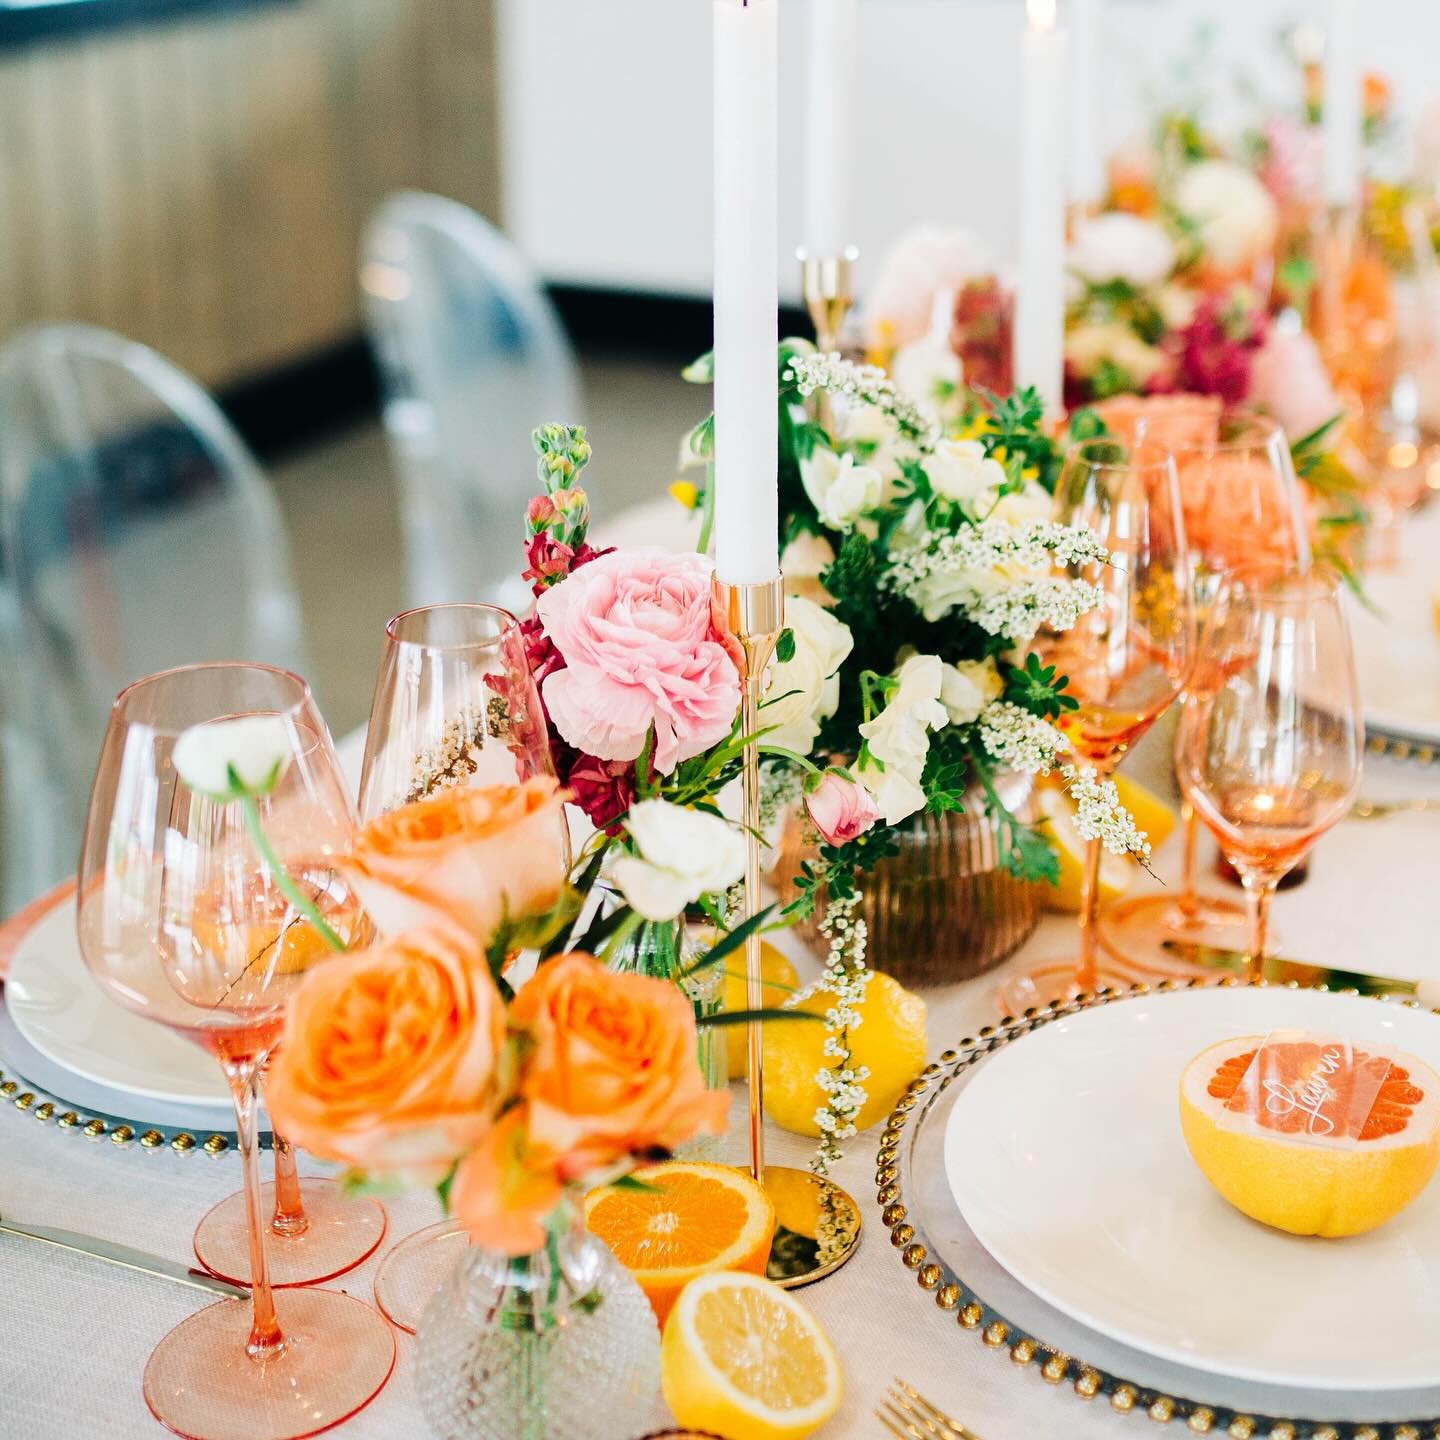 Savoring the sweet essence of spring with sorbet flowers and a citrus-kissed table scape 🍋🌸🍊

@bonnieblueseventvenue 
@brick_and_willow_photography 
@daintydetailscolorado 
@cakthebakery